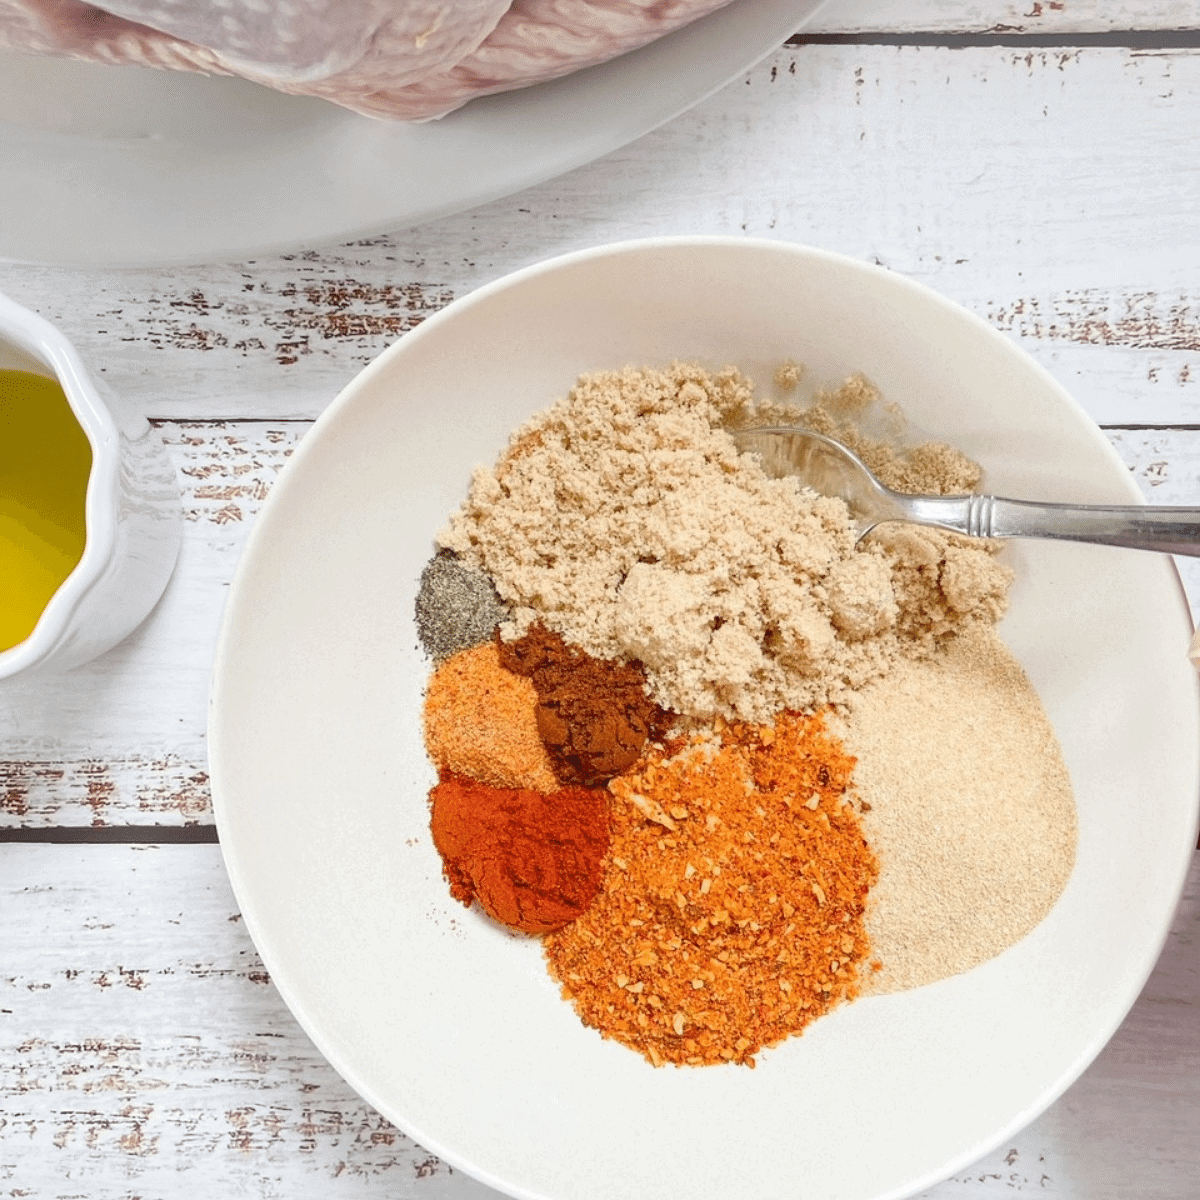 Mix spice rub ingredients together with a spoon until combined